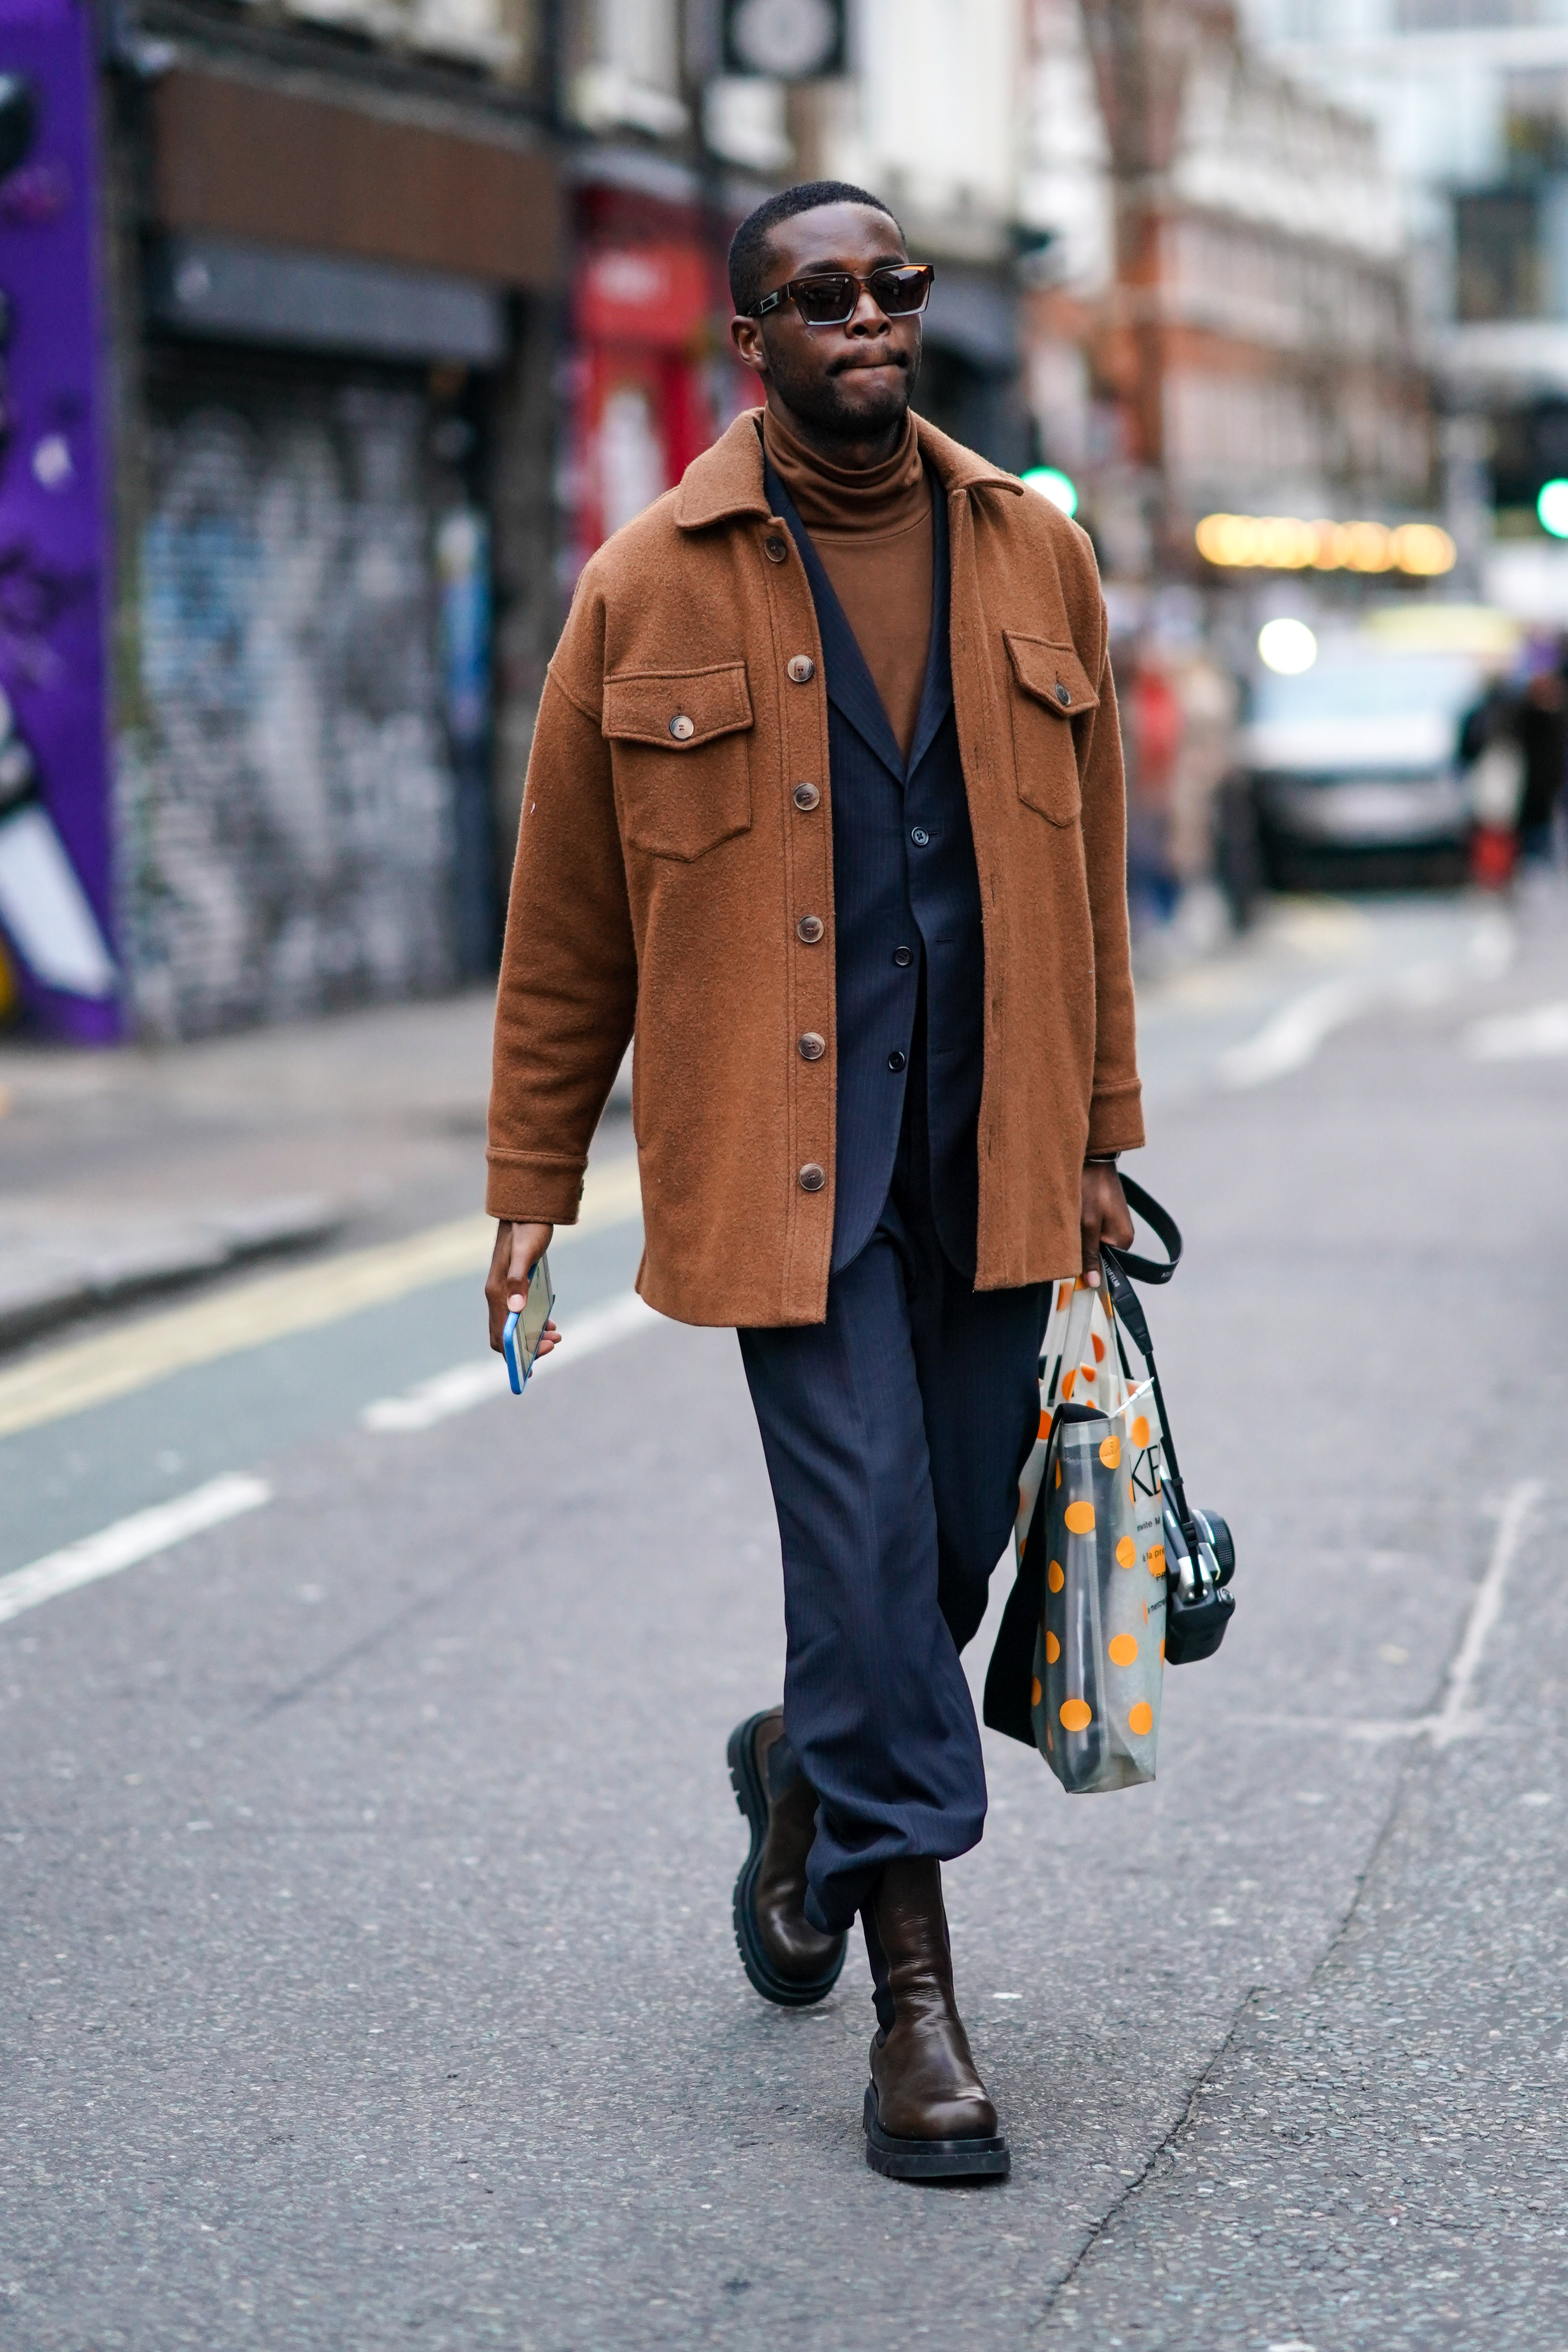 The Best Street Style From London Fashion Week Men's ICON